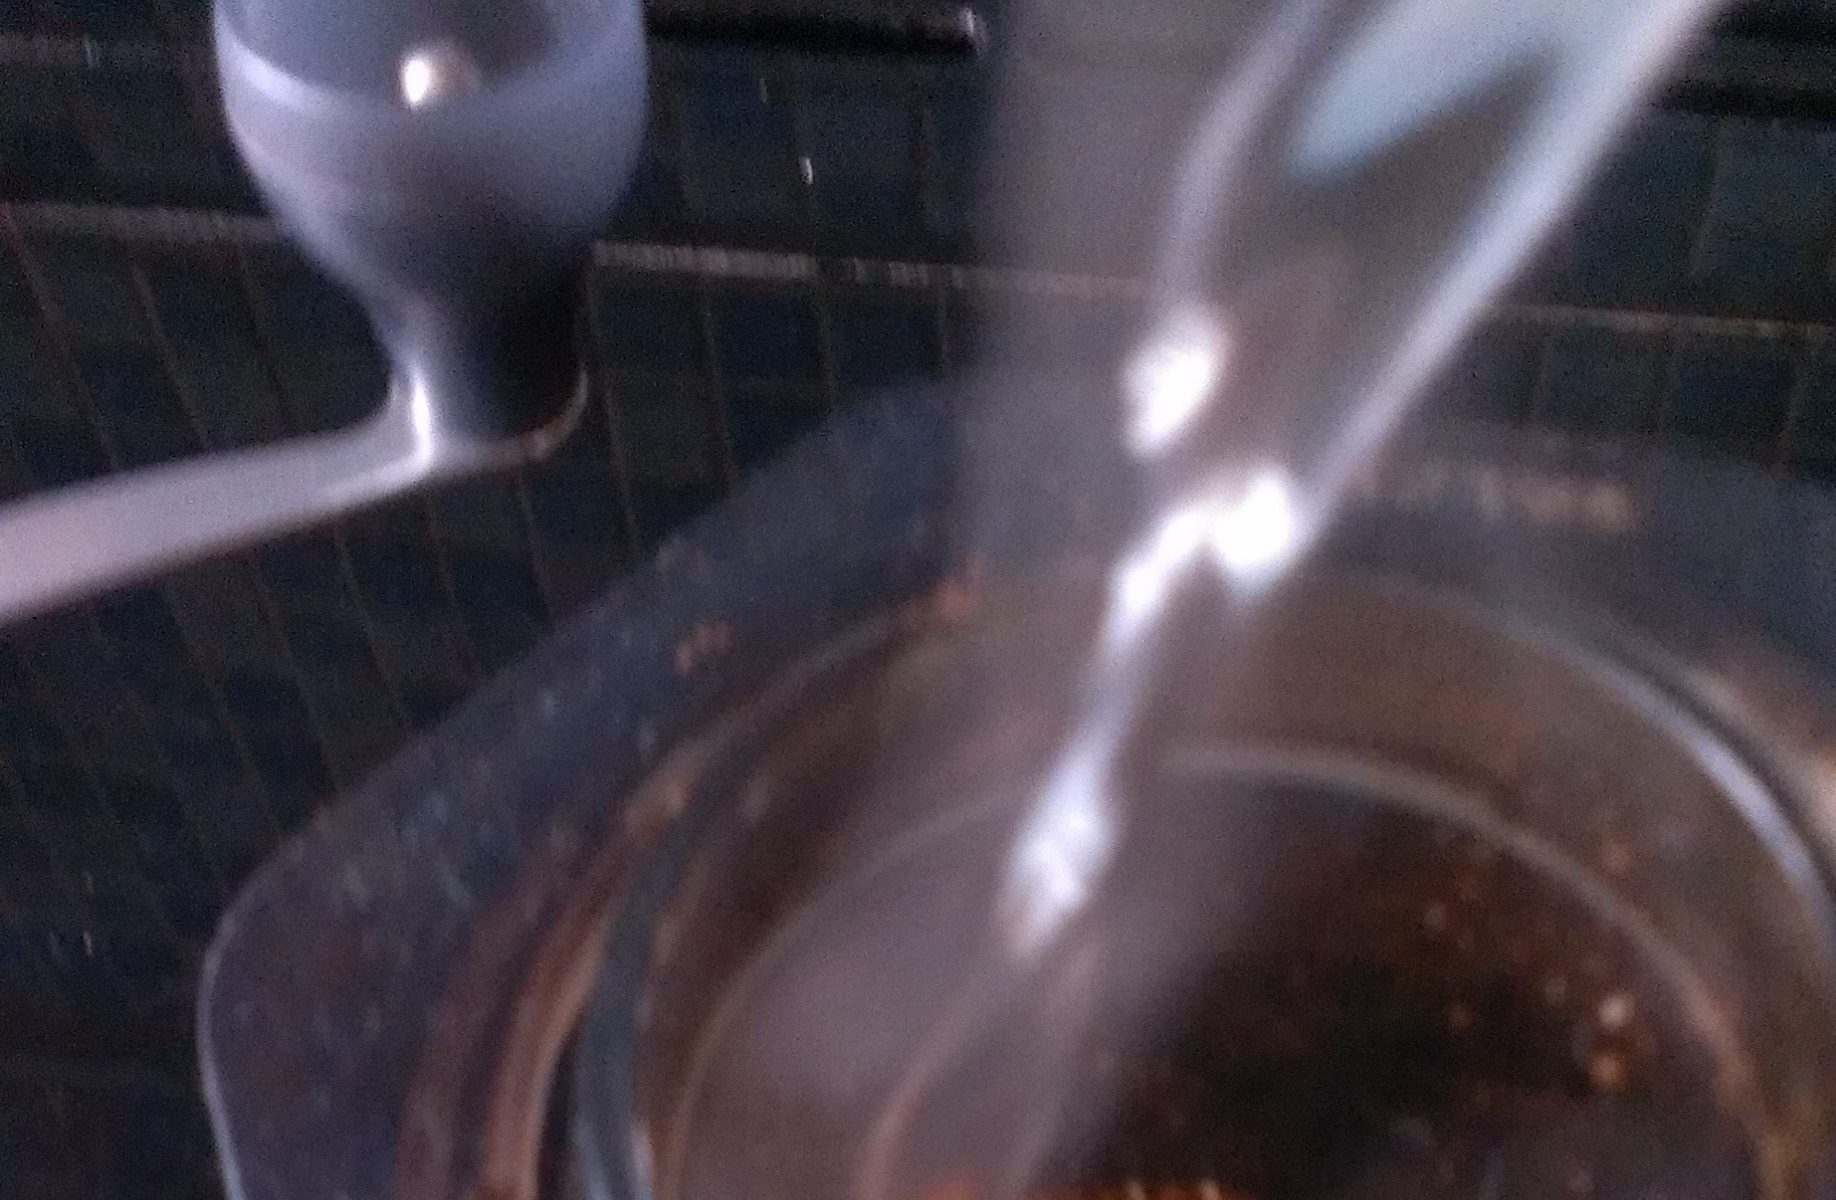 Water pour onto coffee